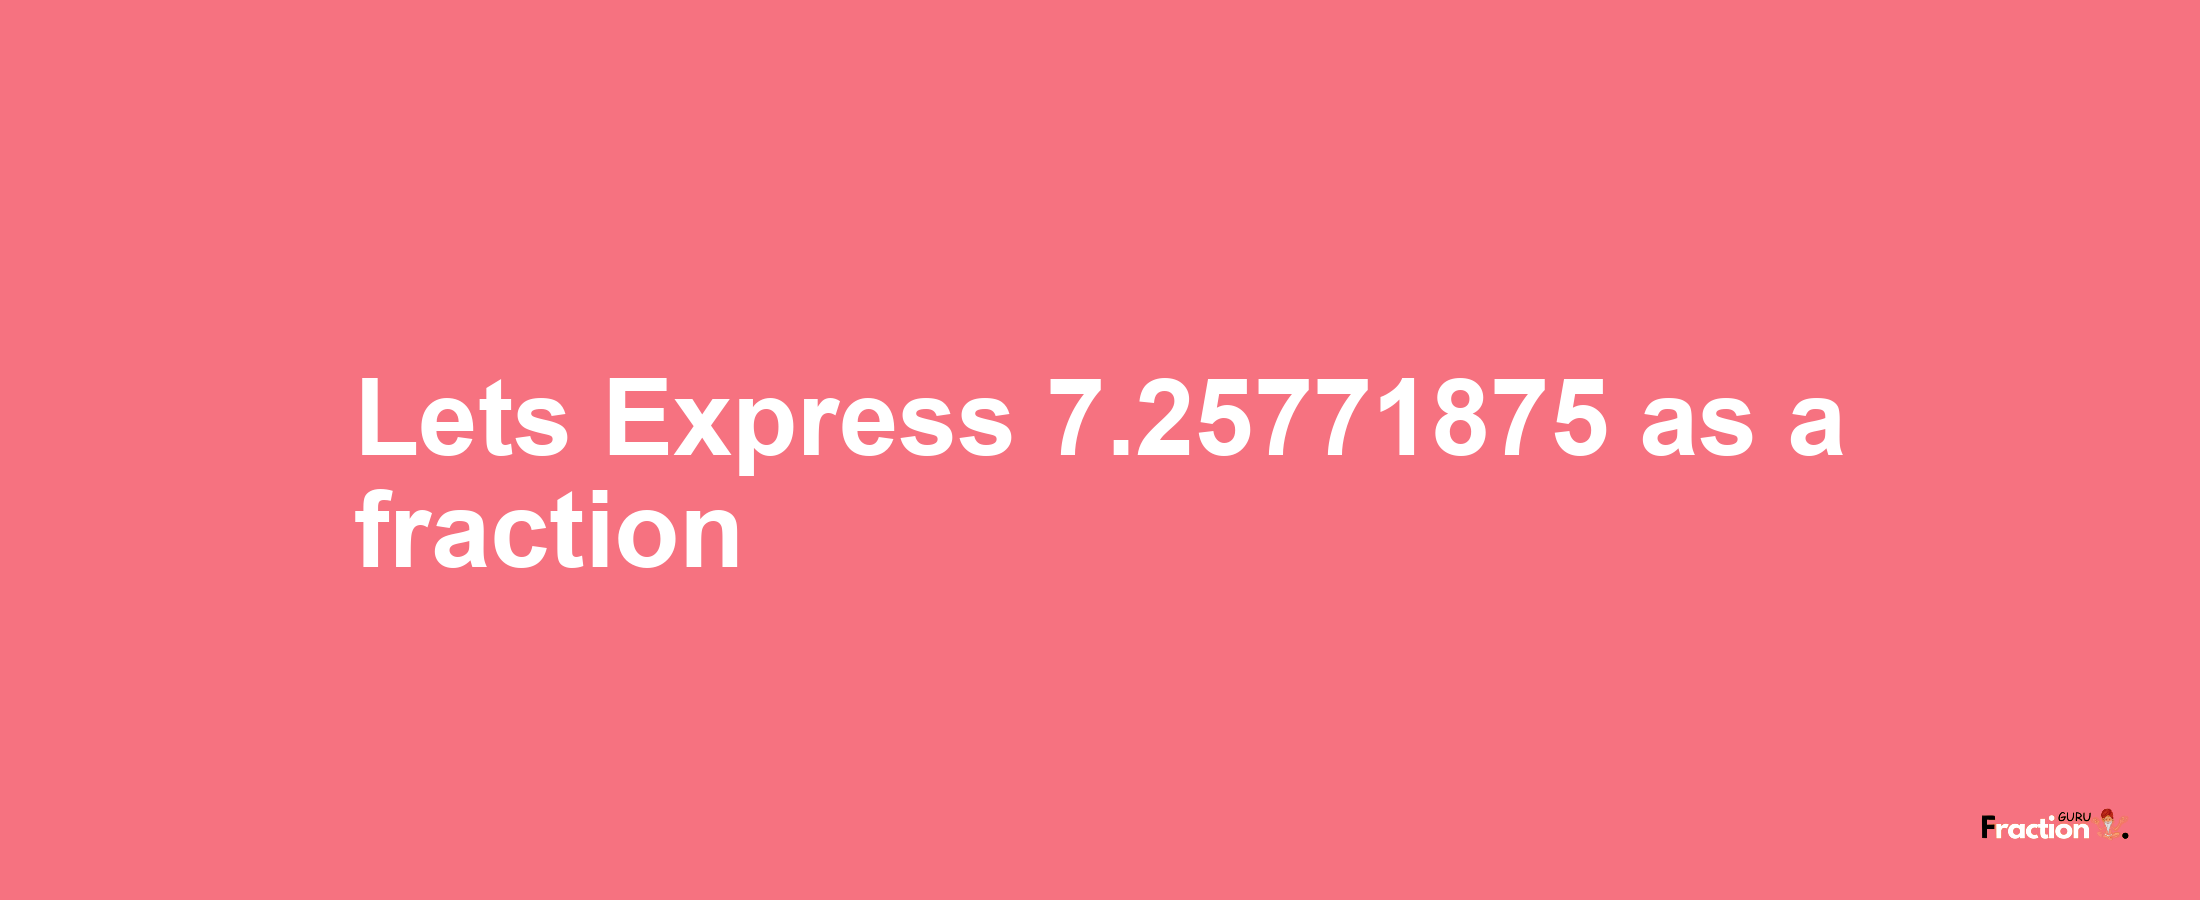 Lets Express 7.25771875 as afraction